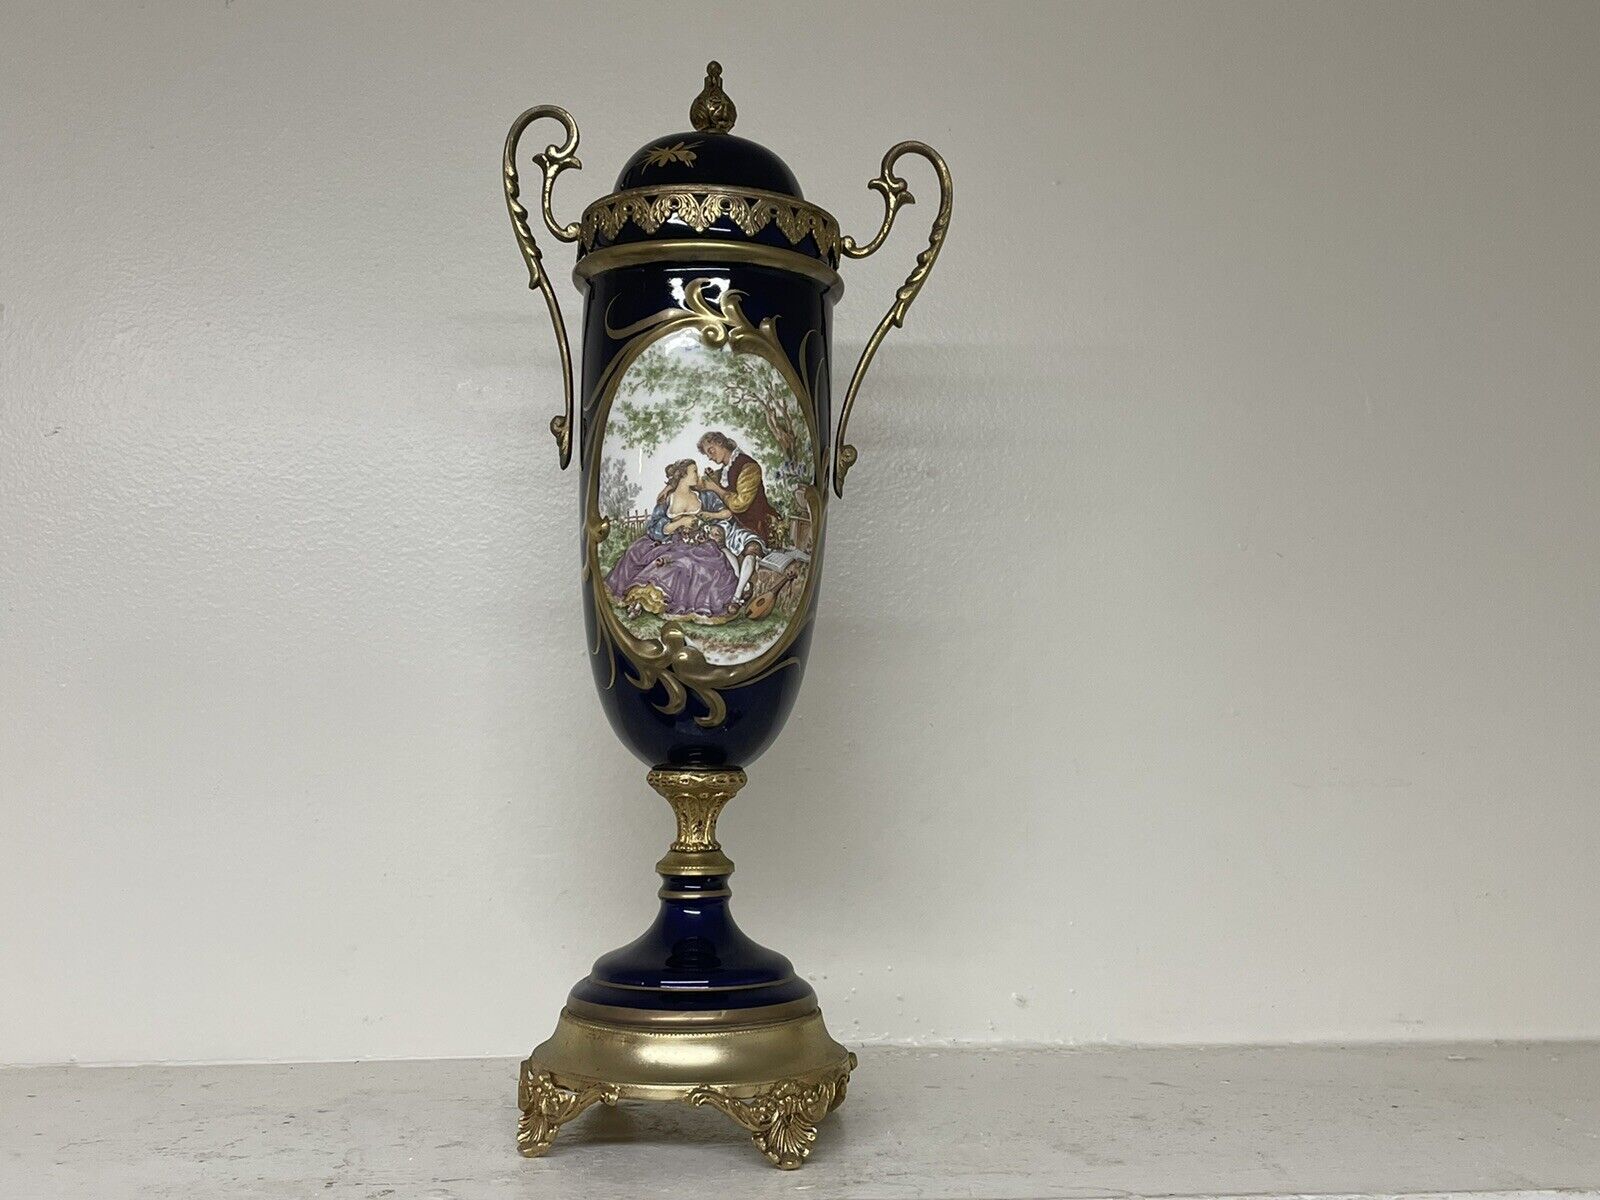 Victorian style￼ Hand painted decor cobalt blue porcelain urn from Italy￼